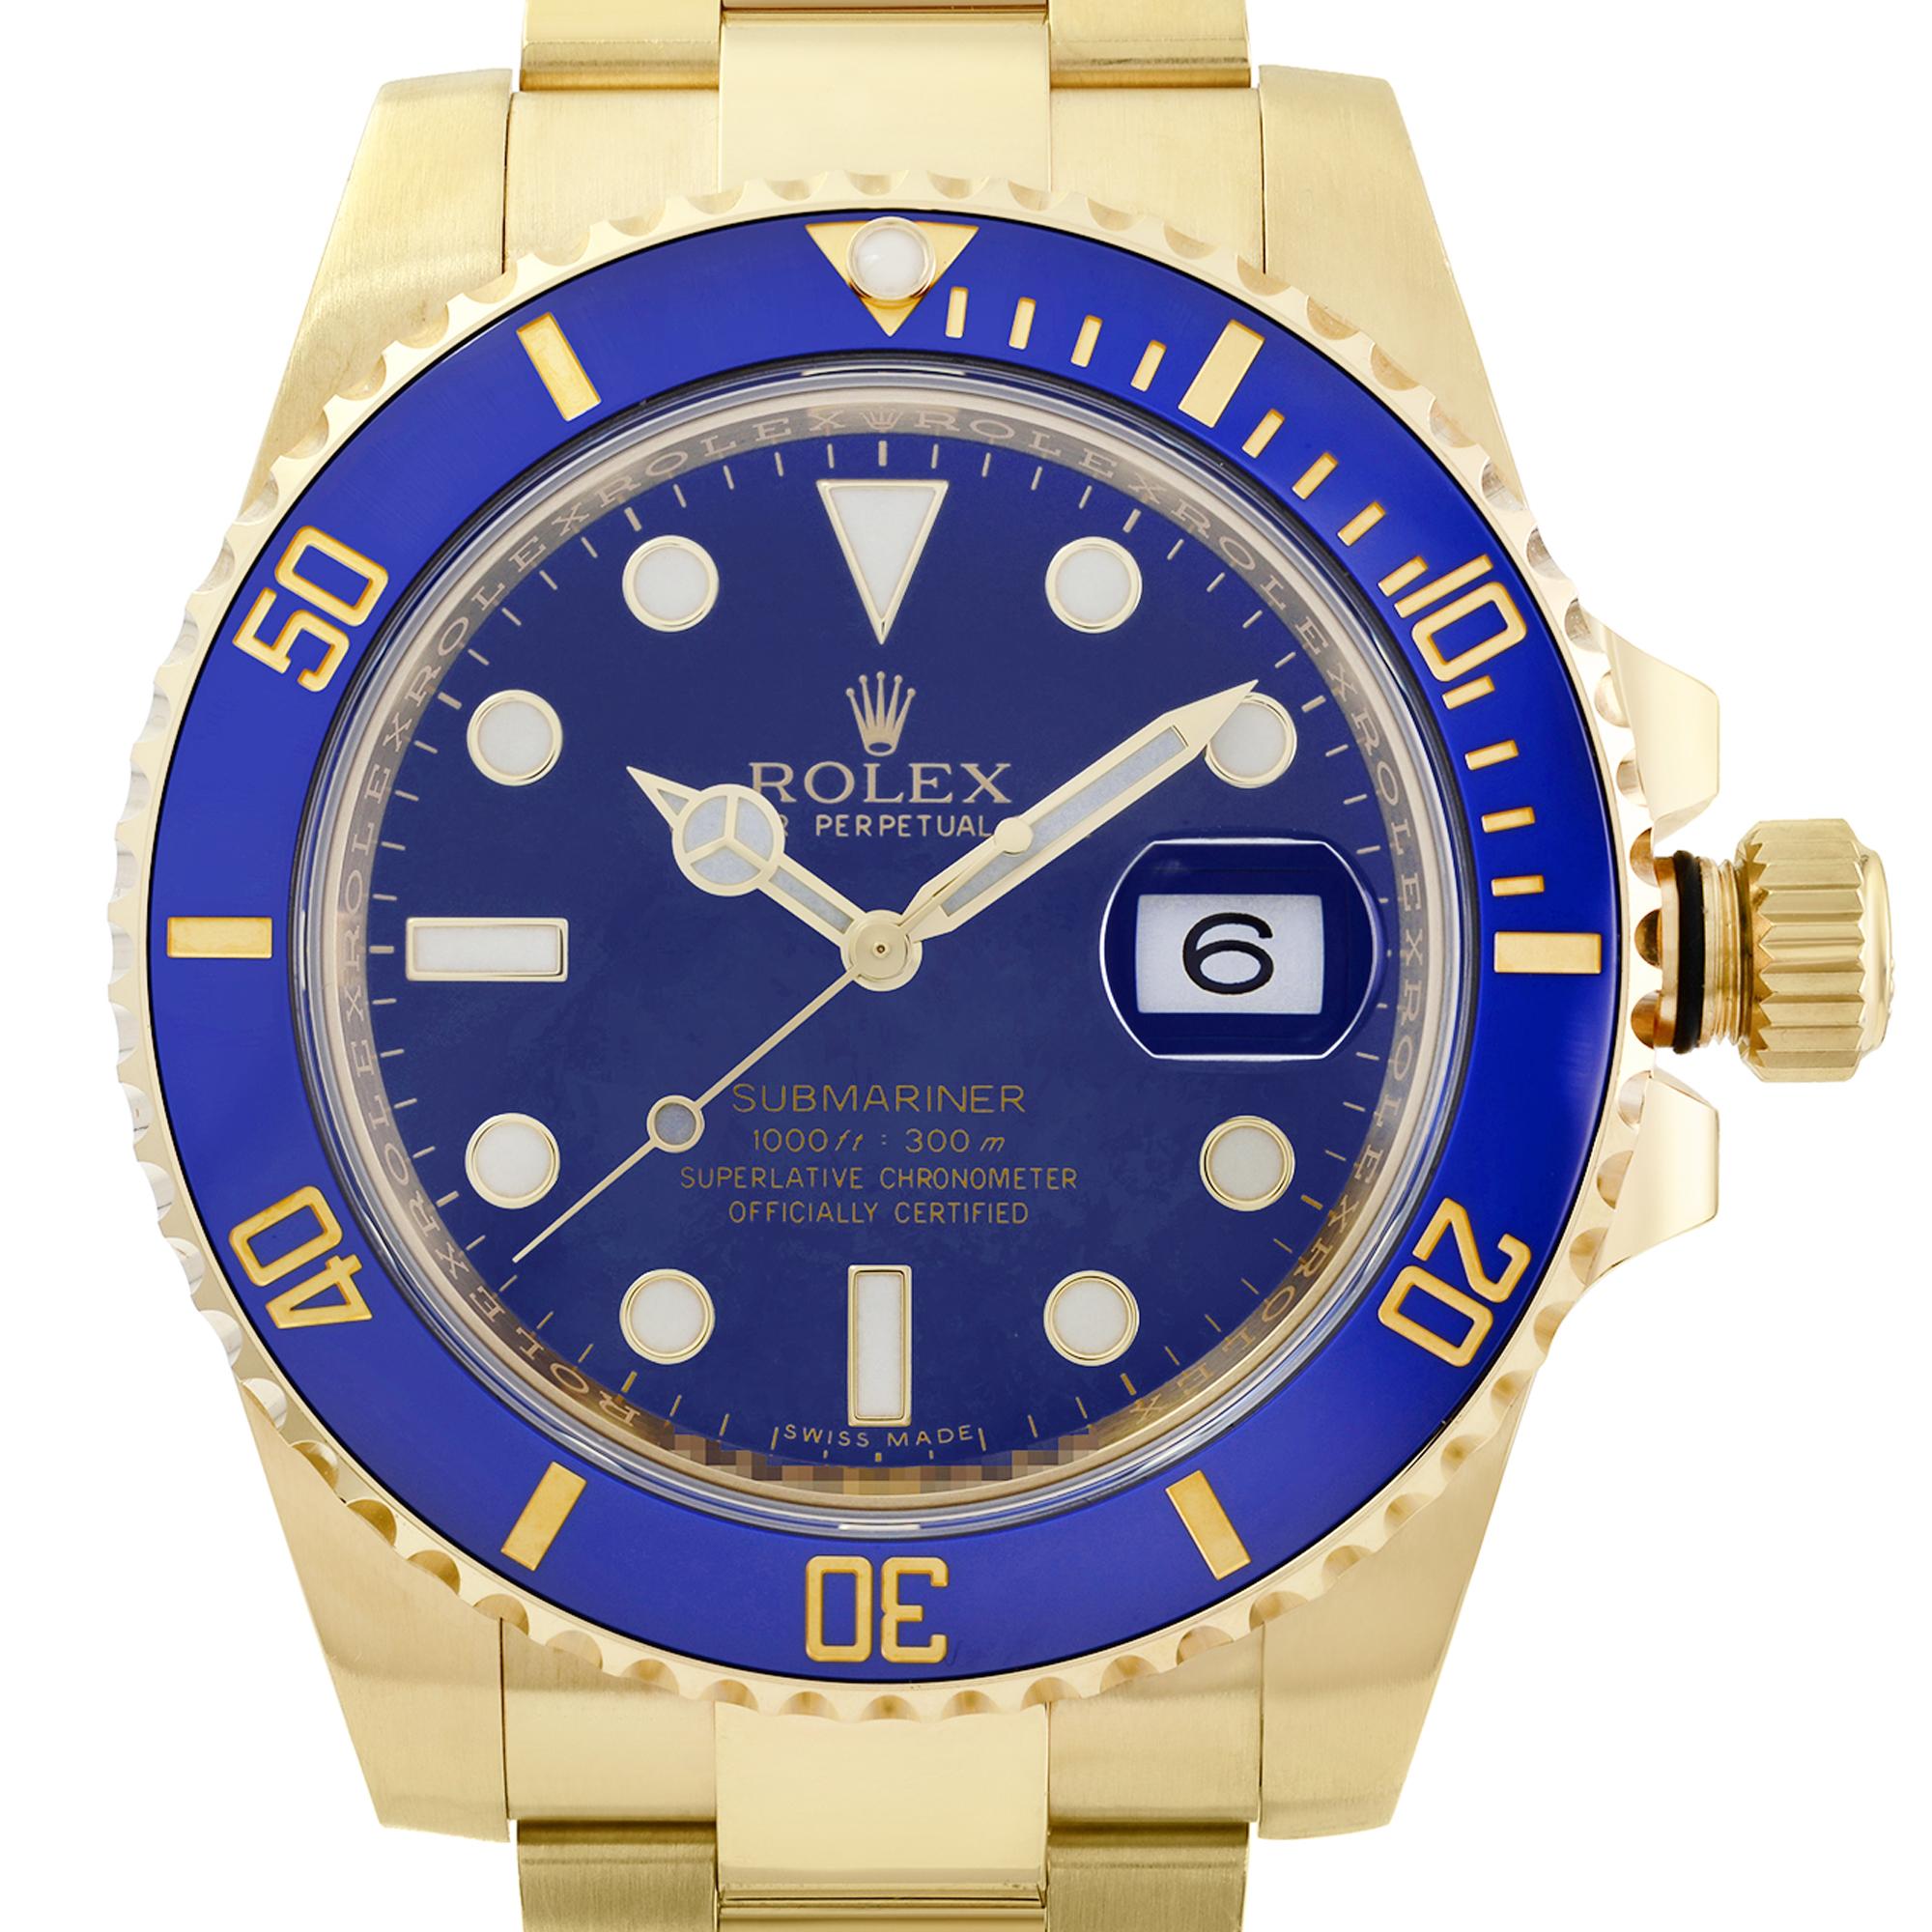 Excellent Mint Condition. 1 Link Short. 2017 Card.  Comes With an Original Box and Original Papers. Chronostore. Covered by 1-year Chronostore Warranty. 
Details:
Brand Rolex
Color Blue
Department Men
Model Number 116618BL
Model Rolex Submariner